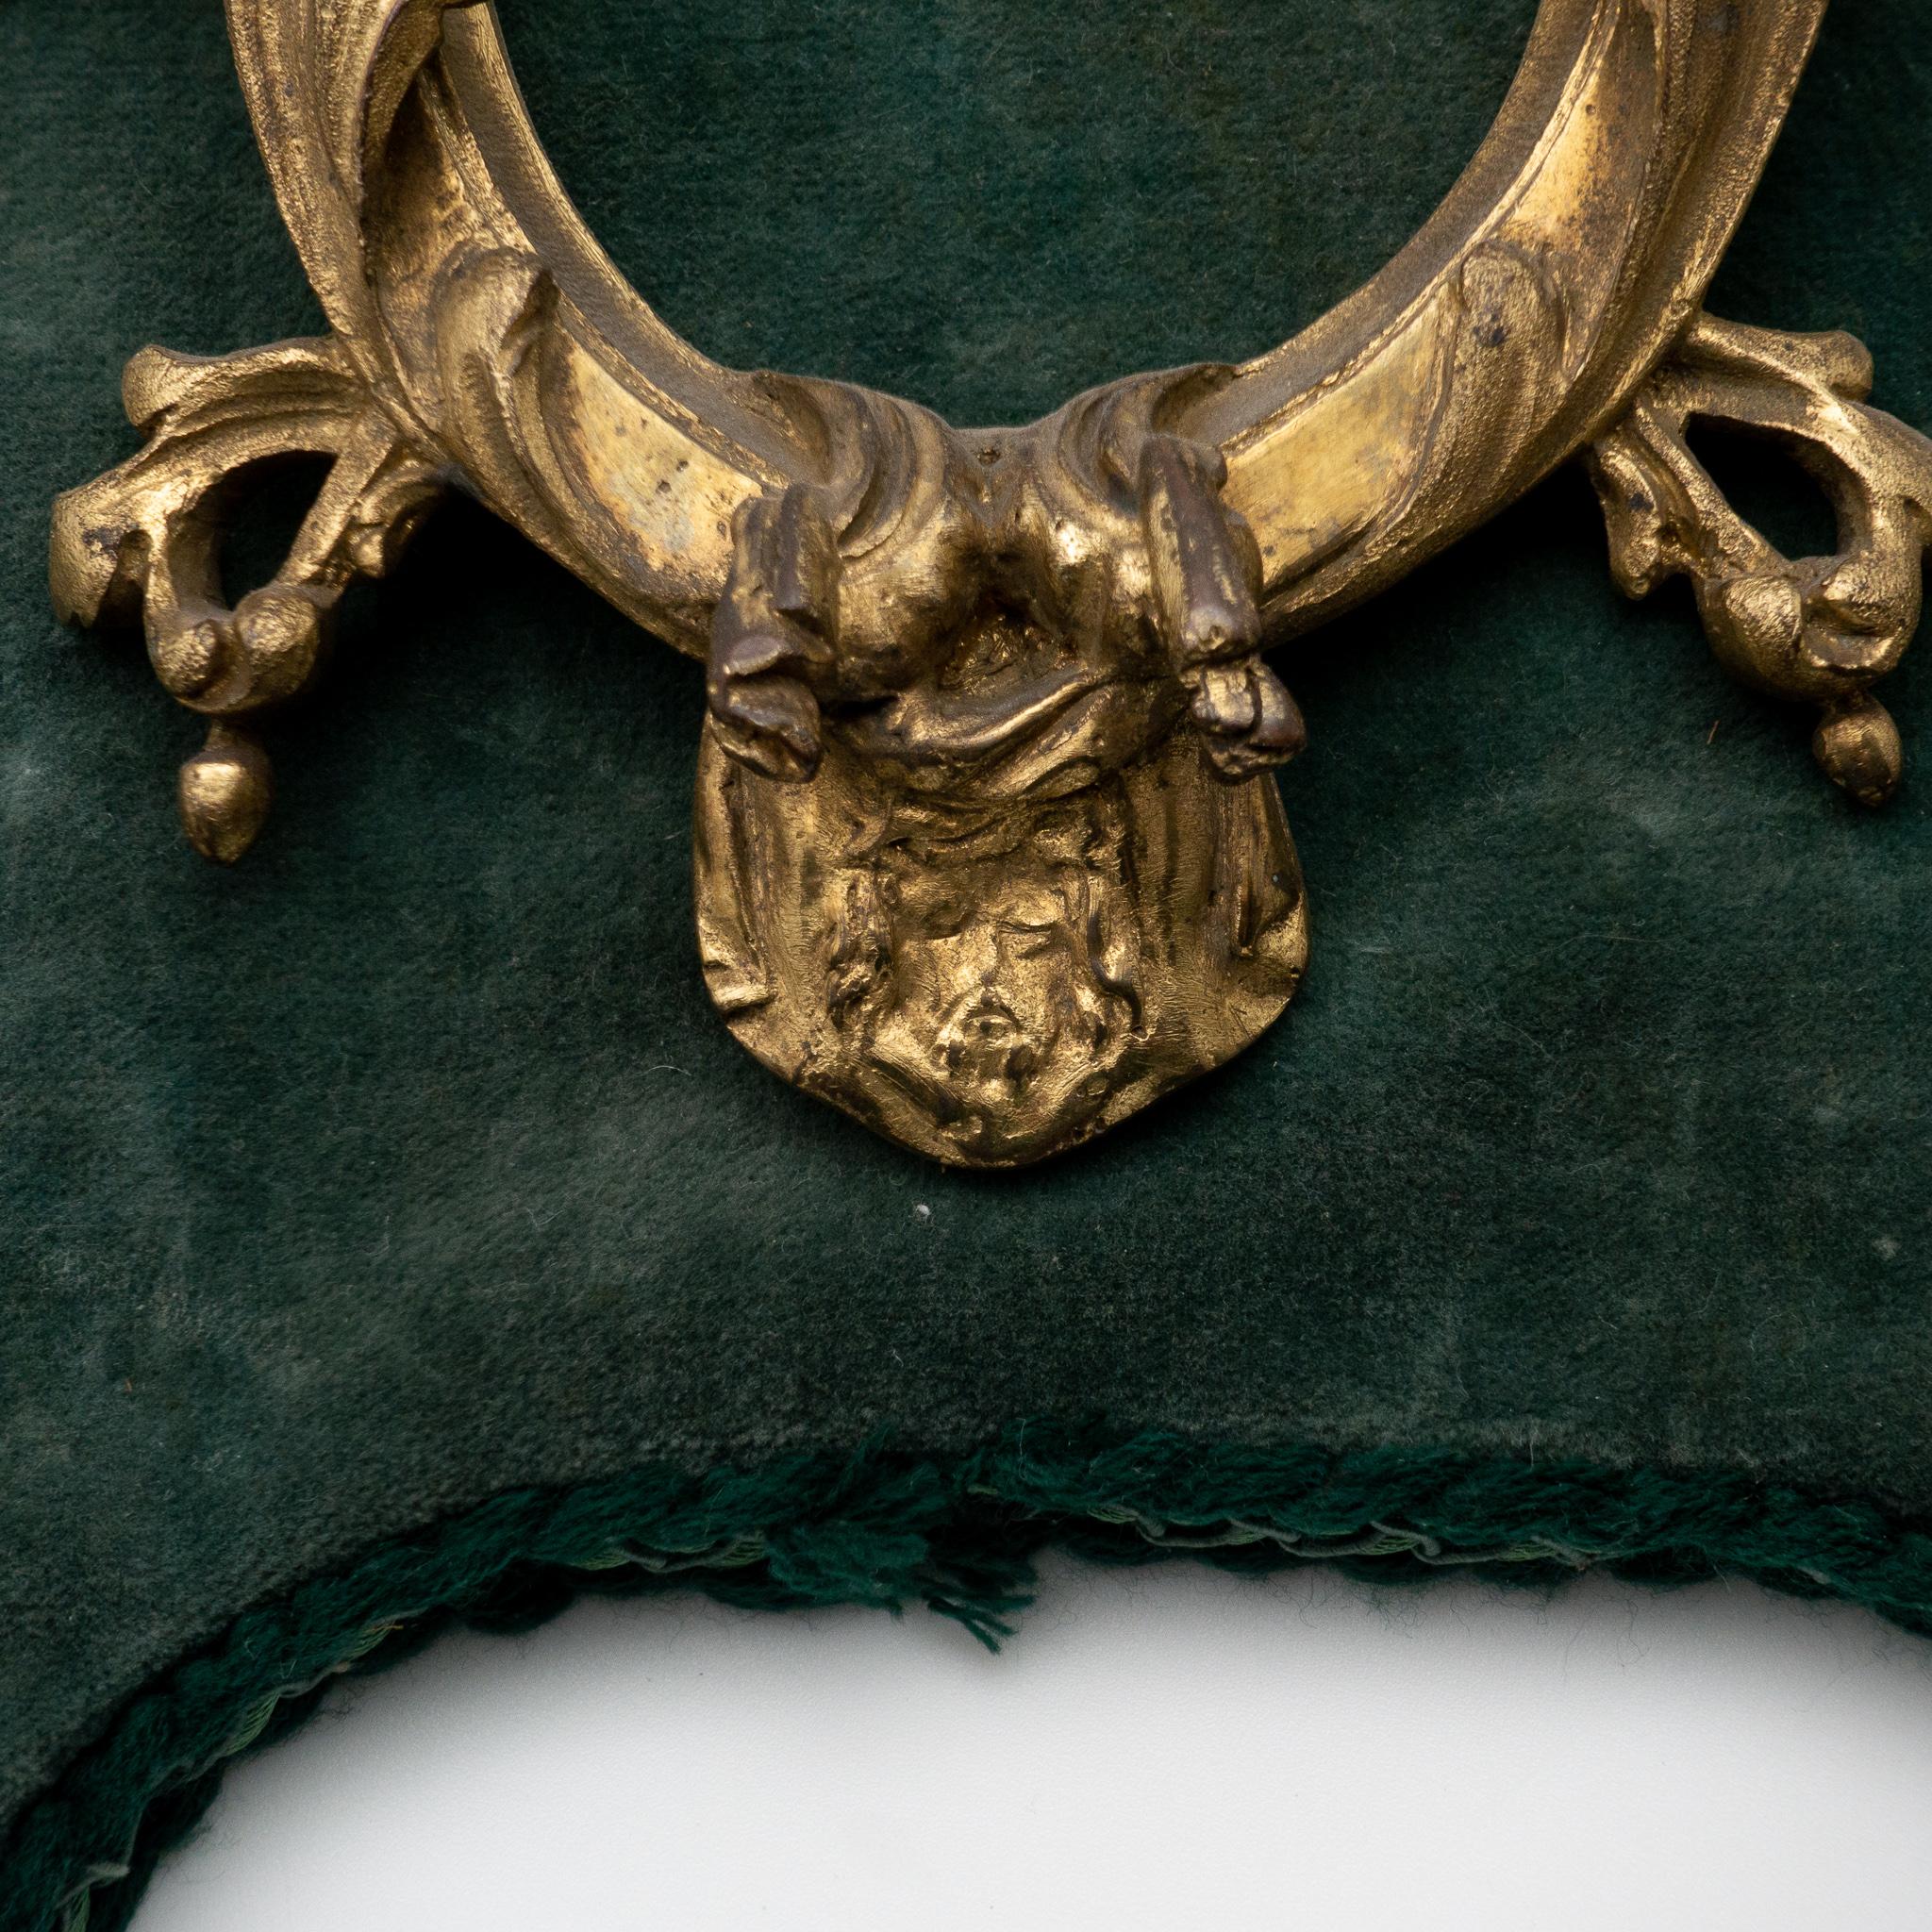 18th Century and Earlier 18th Century French Rococo Gilded Bronze Frame Mounted on Green Velvet For Sale